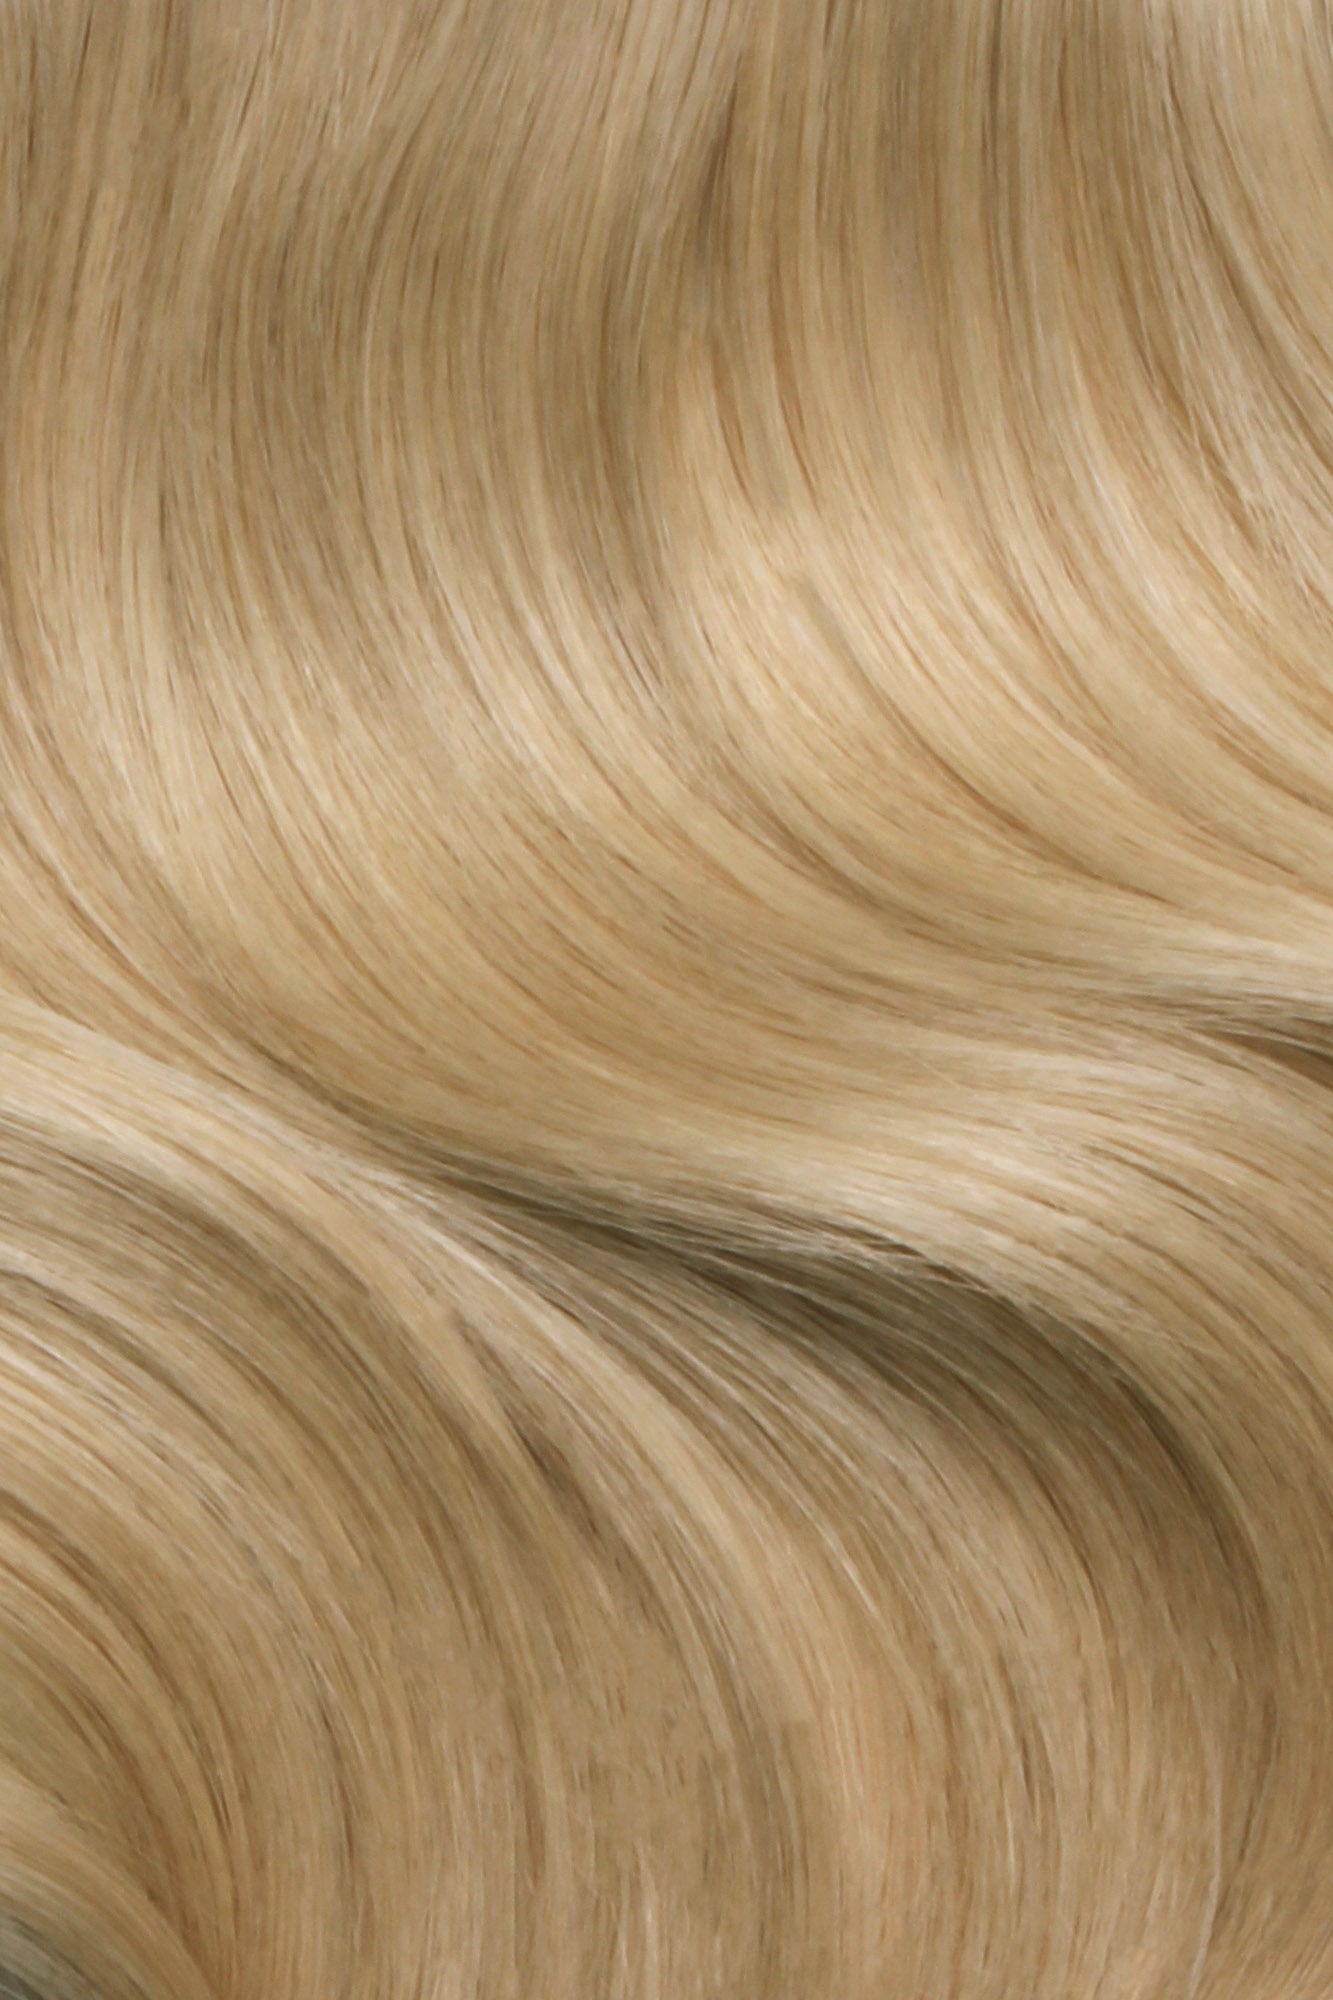 Nano Bonds 24 Inches - SWAY Hair Extensions Beach-Ash-Blonde-9-613 Ultra-fine, invisible bonds for a flawless, natural look. 100% Remy Human hair, lightweight and versatile. Reusable and perfect for individual or salon use.